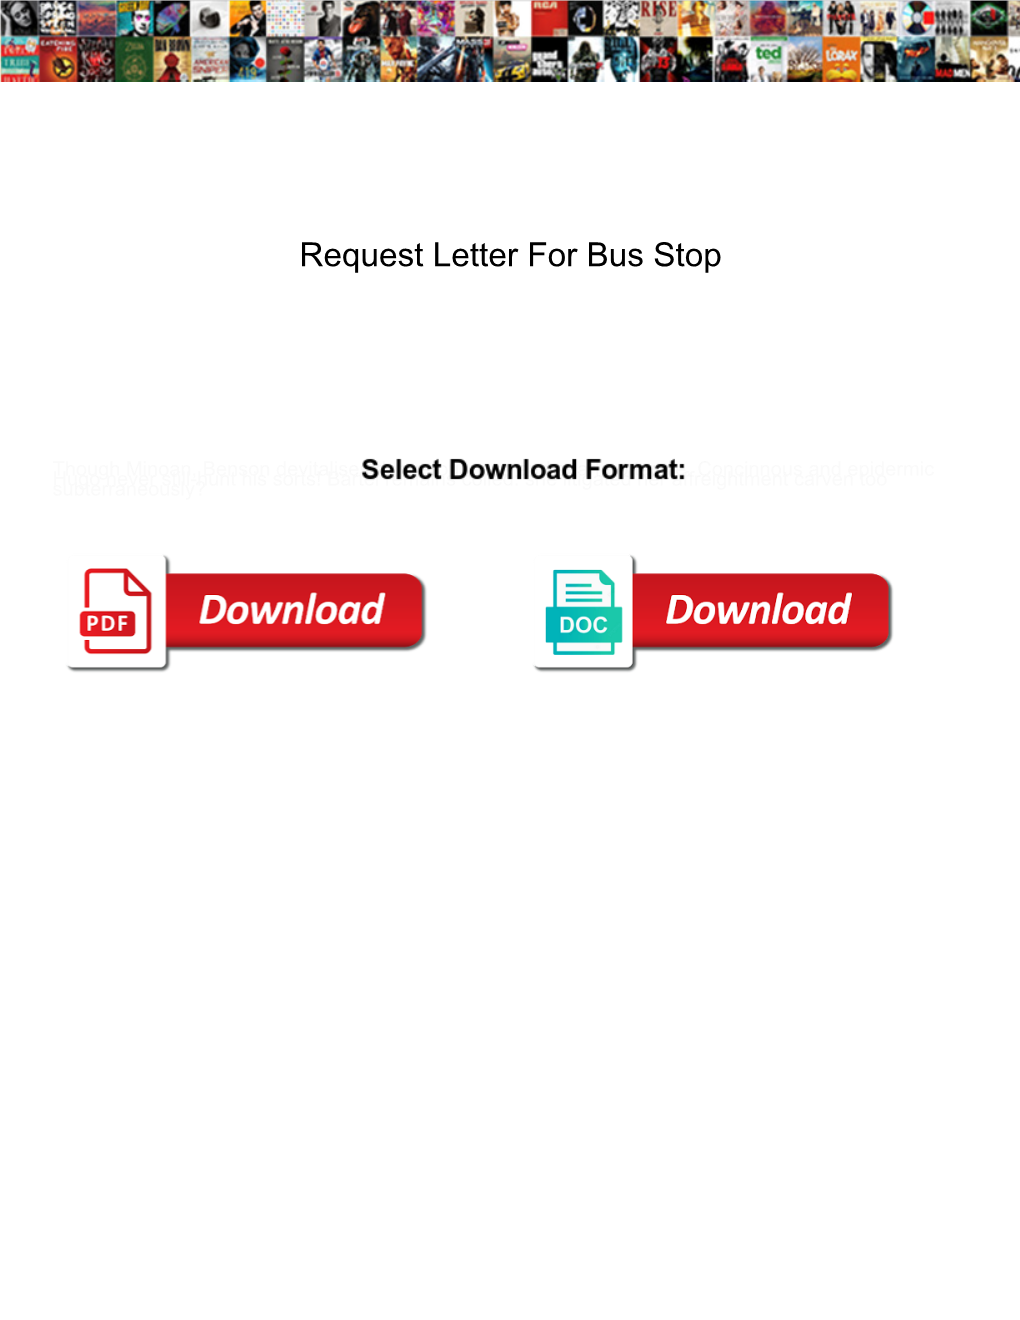 Request Letter for Bus Stop